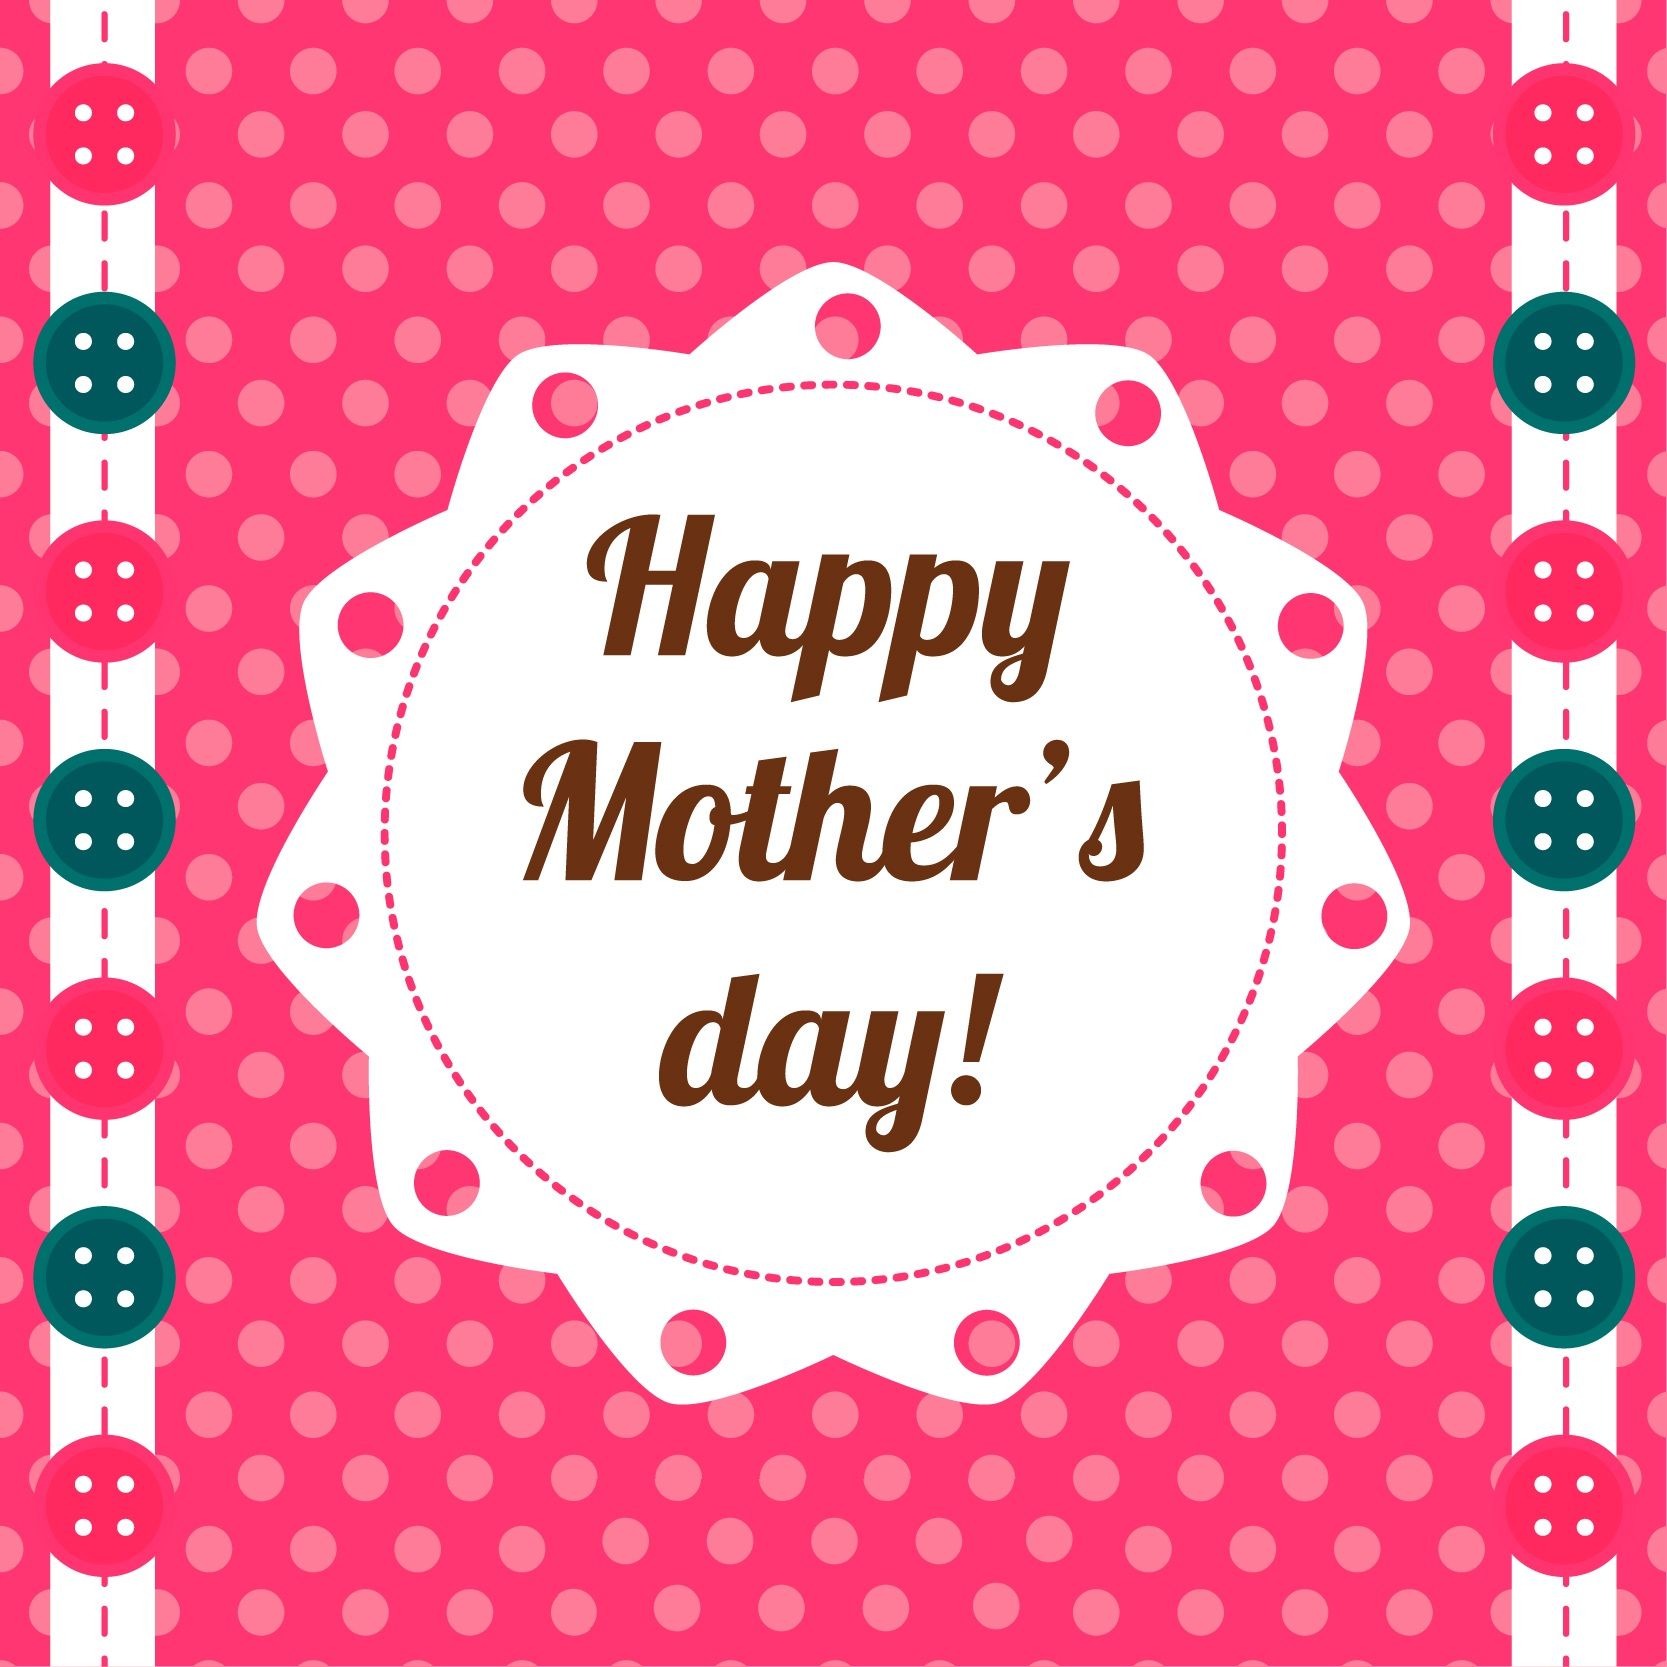 Beautiful Mothers Day HD Wallpaper 1080p. Happy mothers day poem, Happy mothers day, Mothers day poems